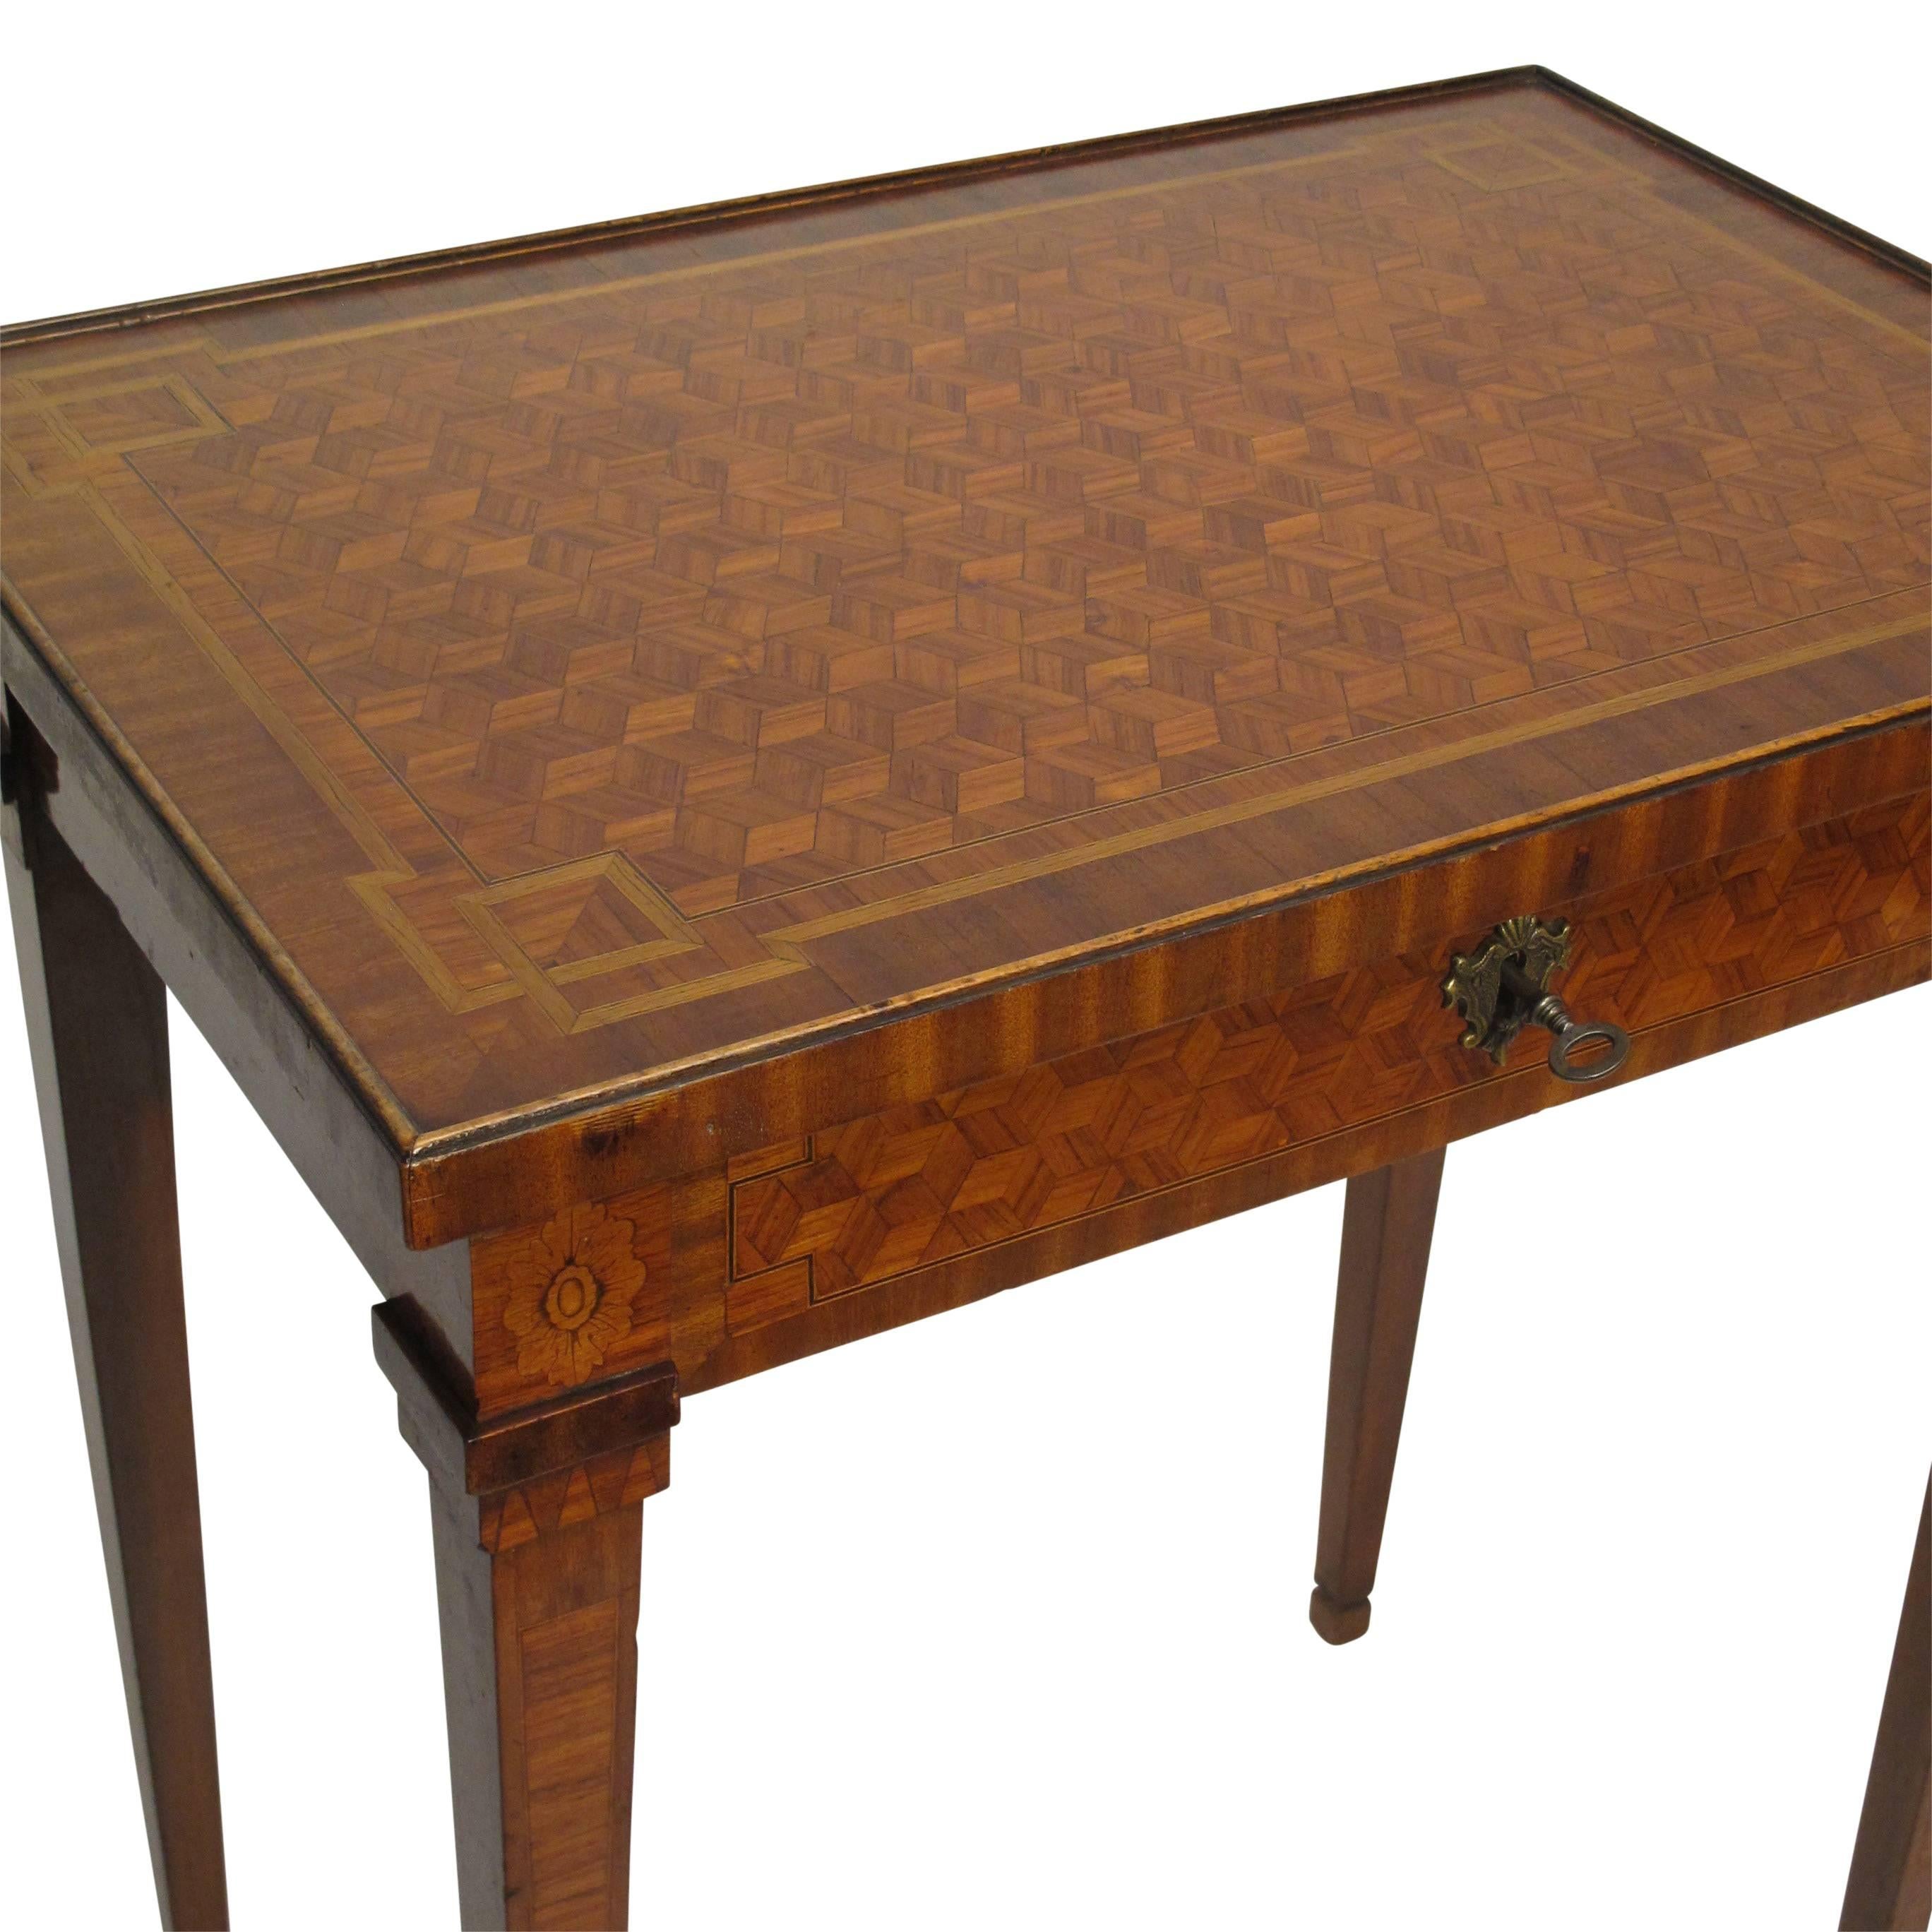 Walnut and Mixed Fruitwood Parquetry Side Table, French, 18th Century For Sale 3